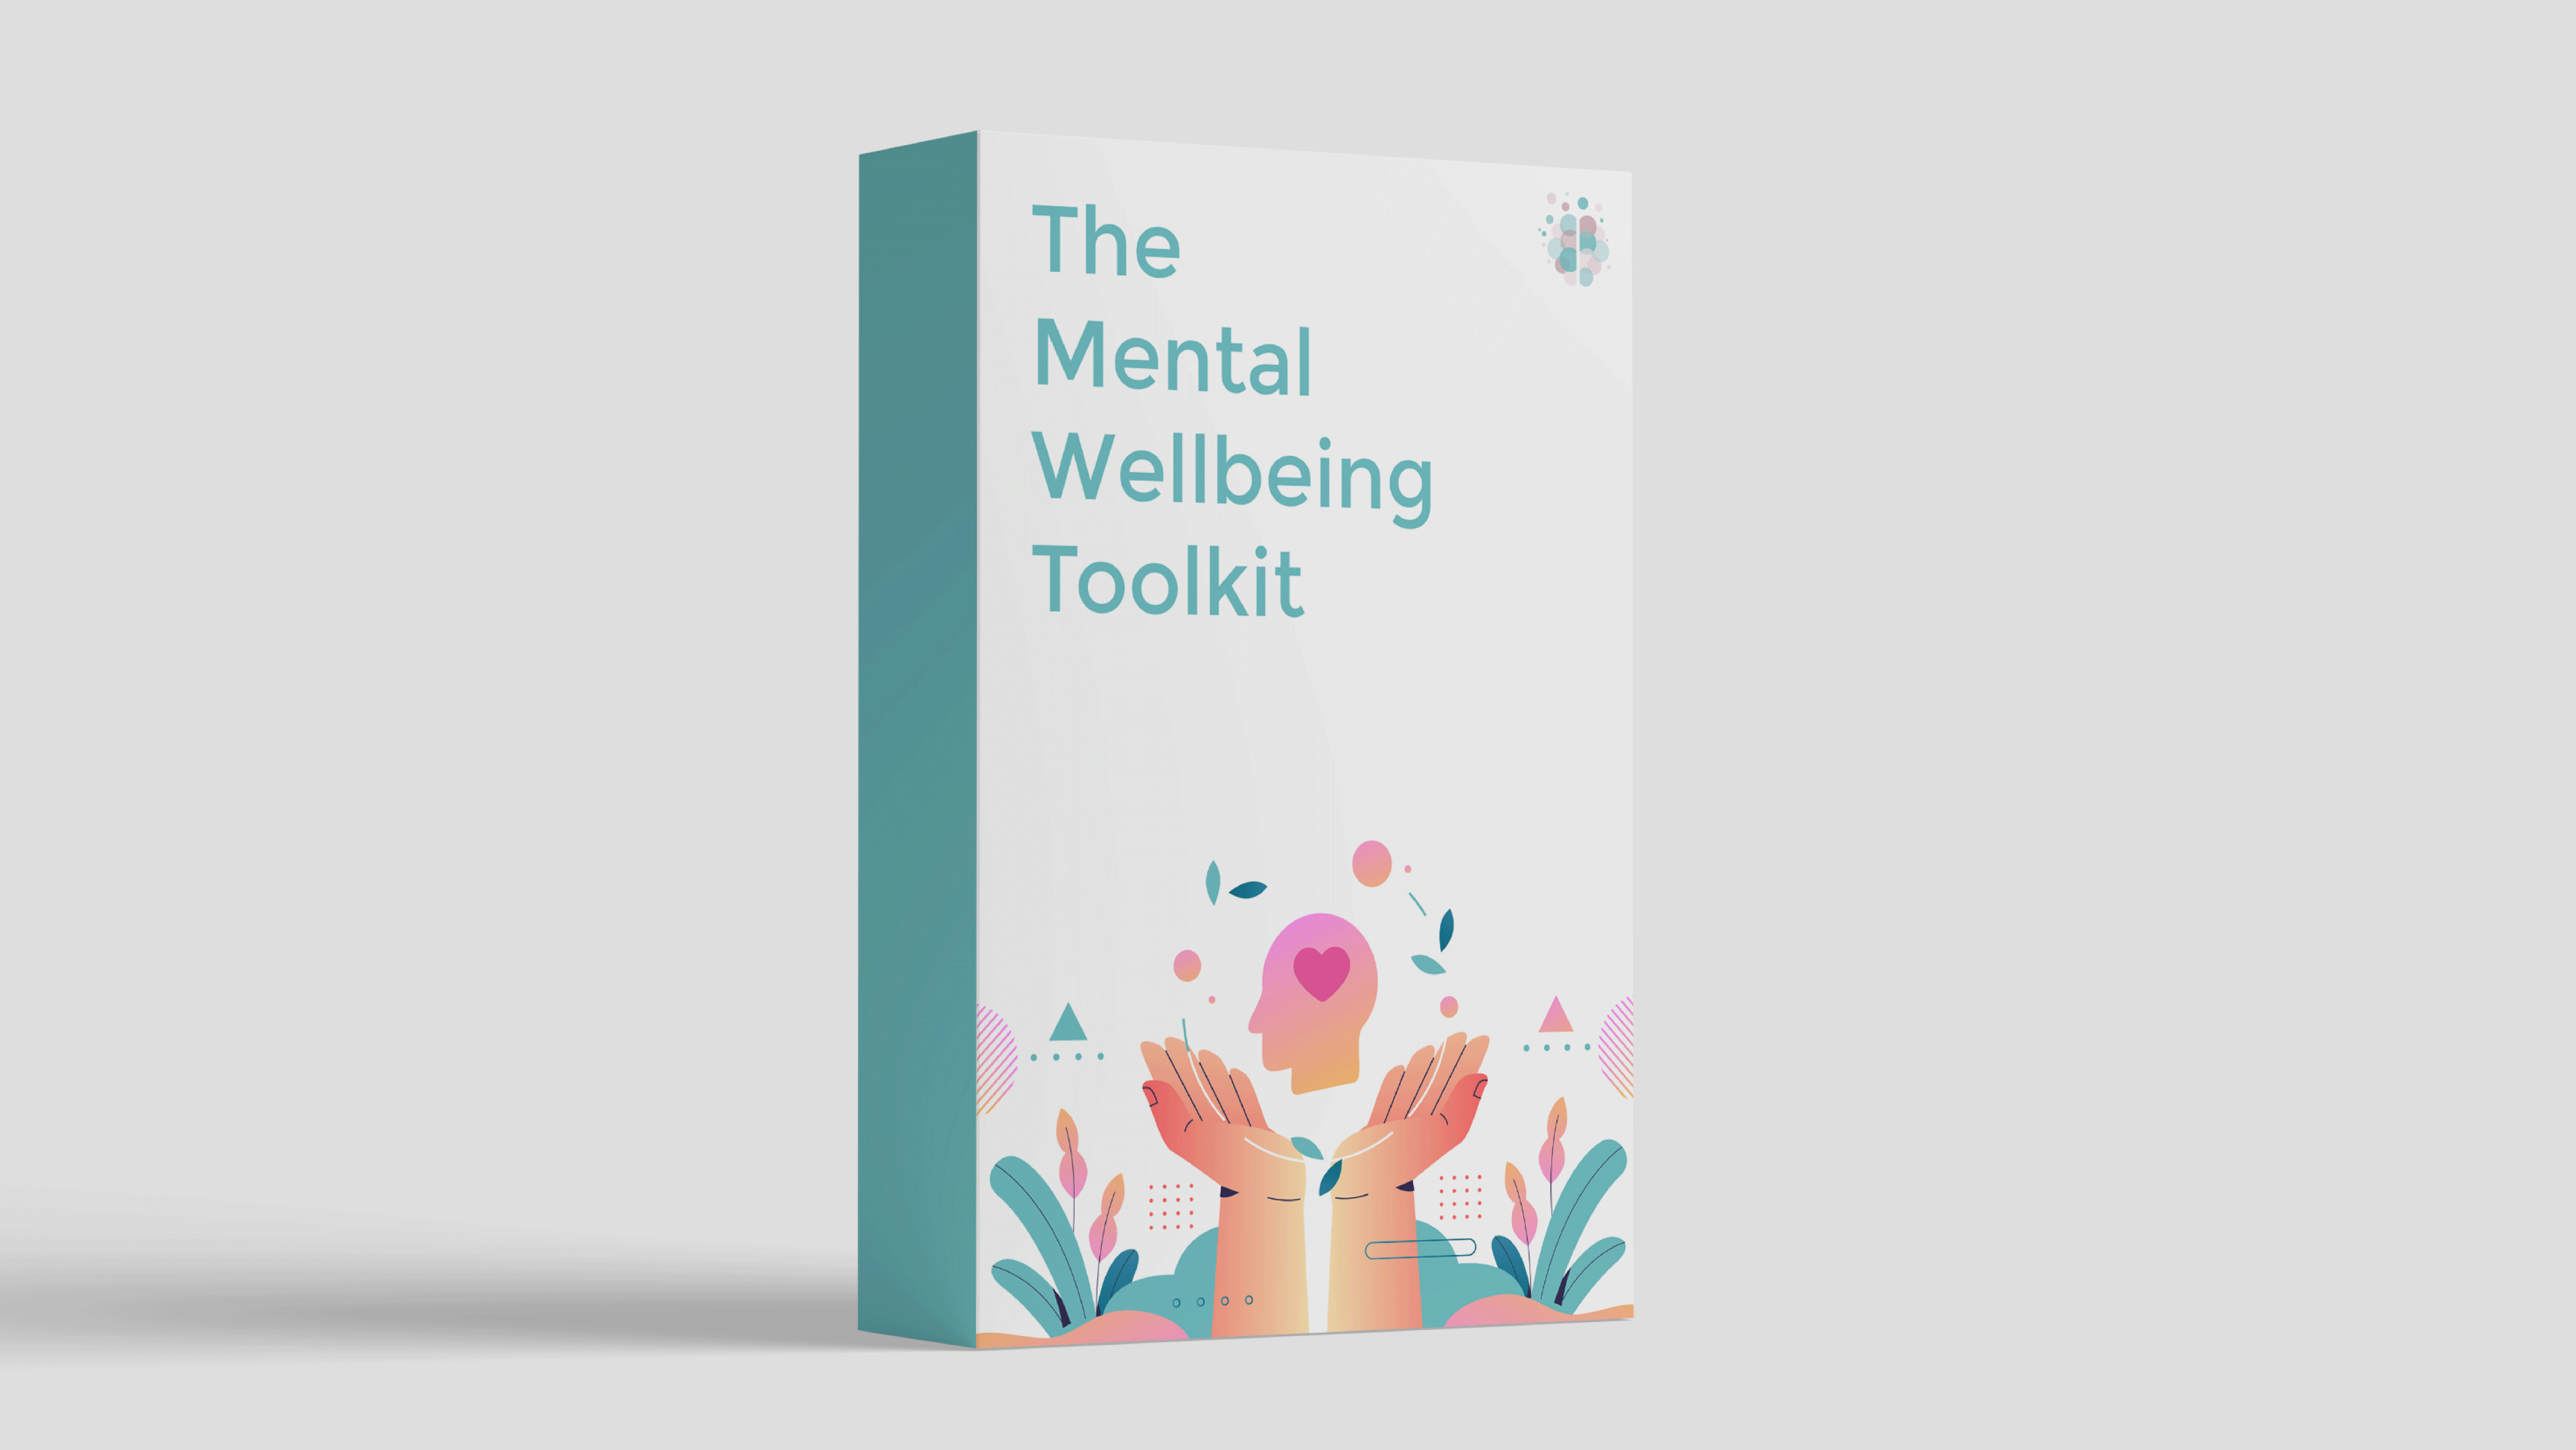 The Mental Wellbeing Toolkit